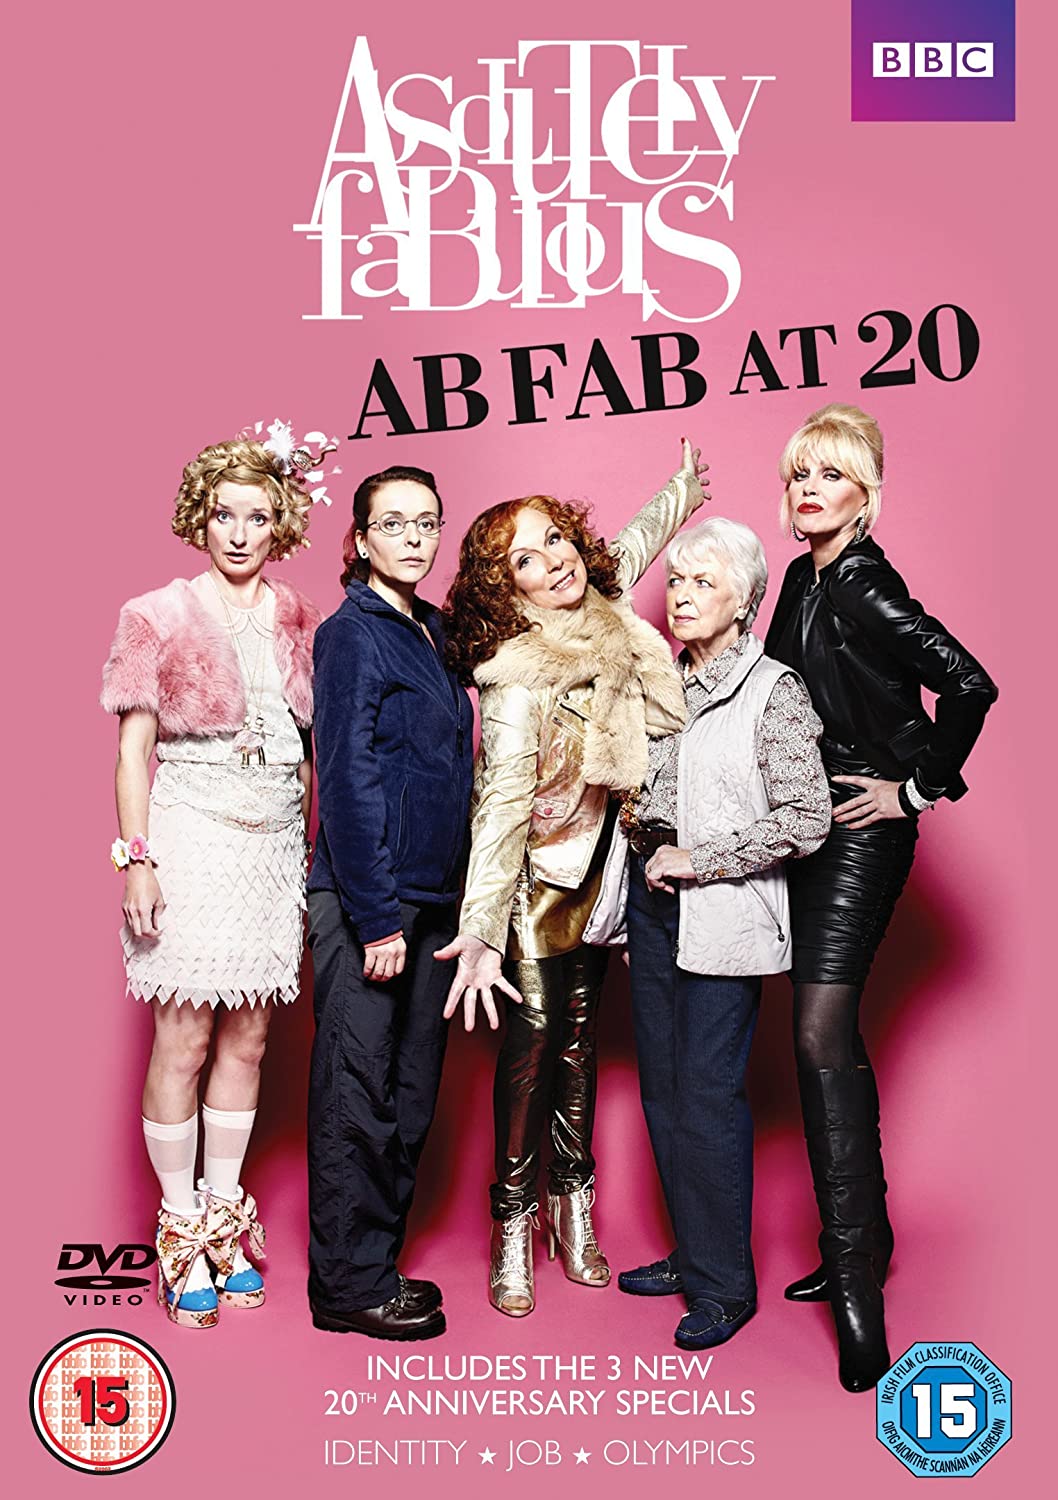 Absolutely Fabulous: Ab Fab at 20 - The 2012 Specials